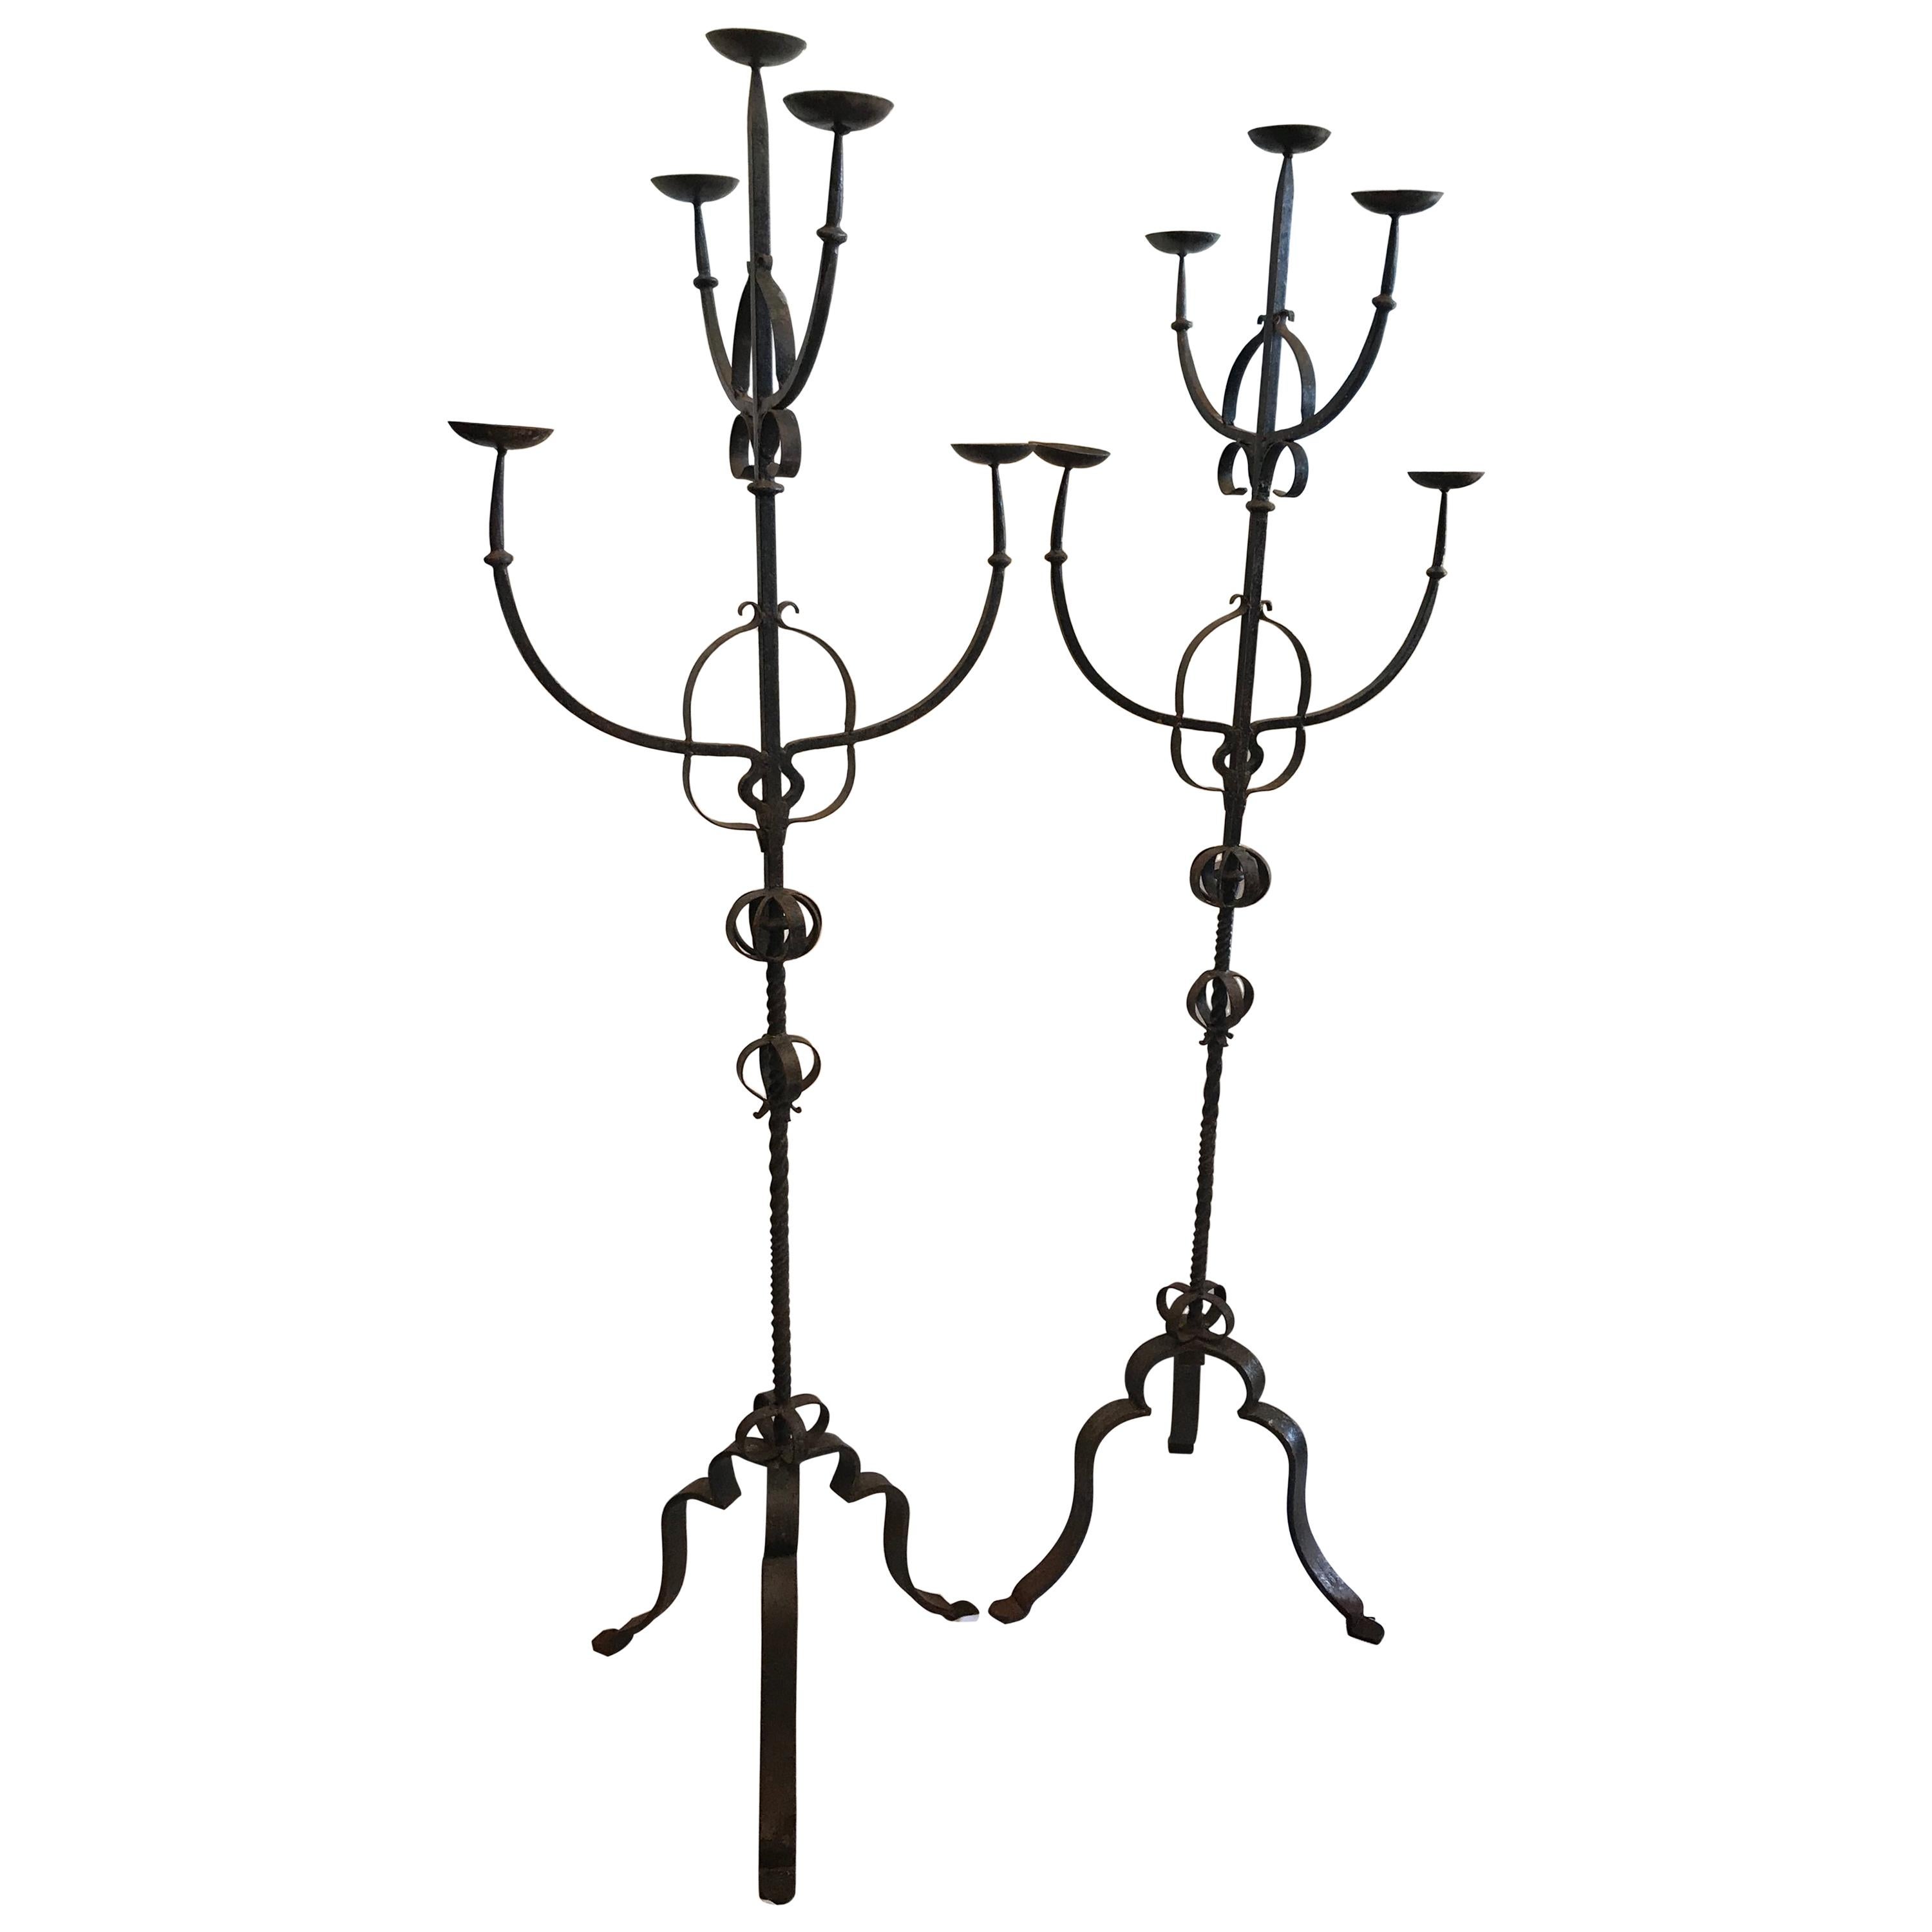 19th Century French Iron Standing Floor Candelabras with Three Arms, a ...